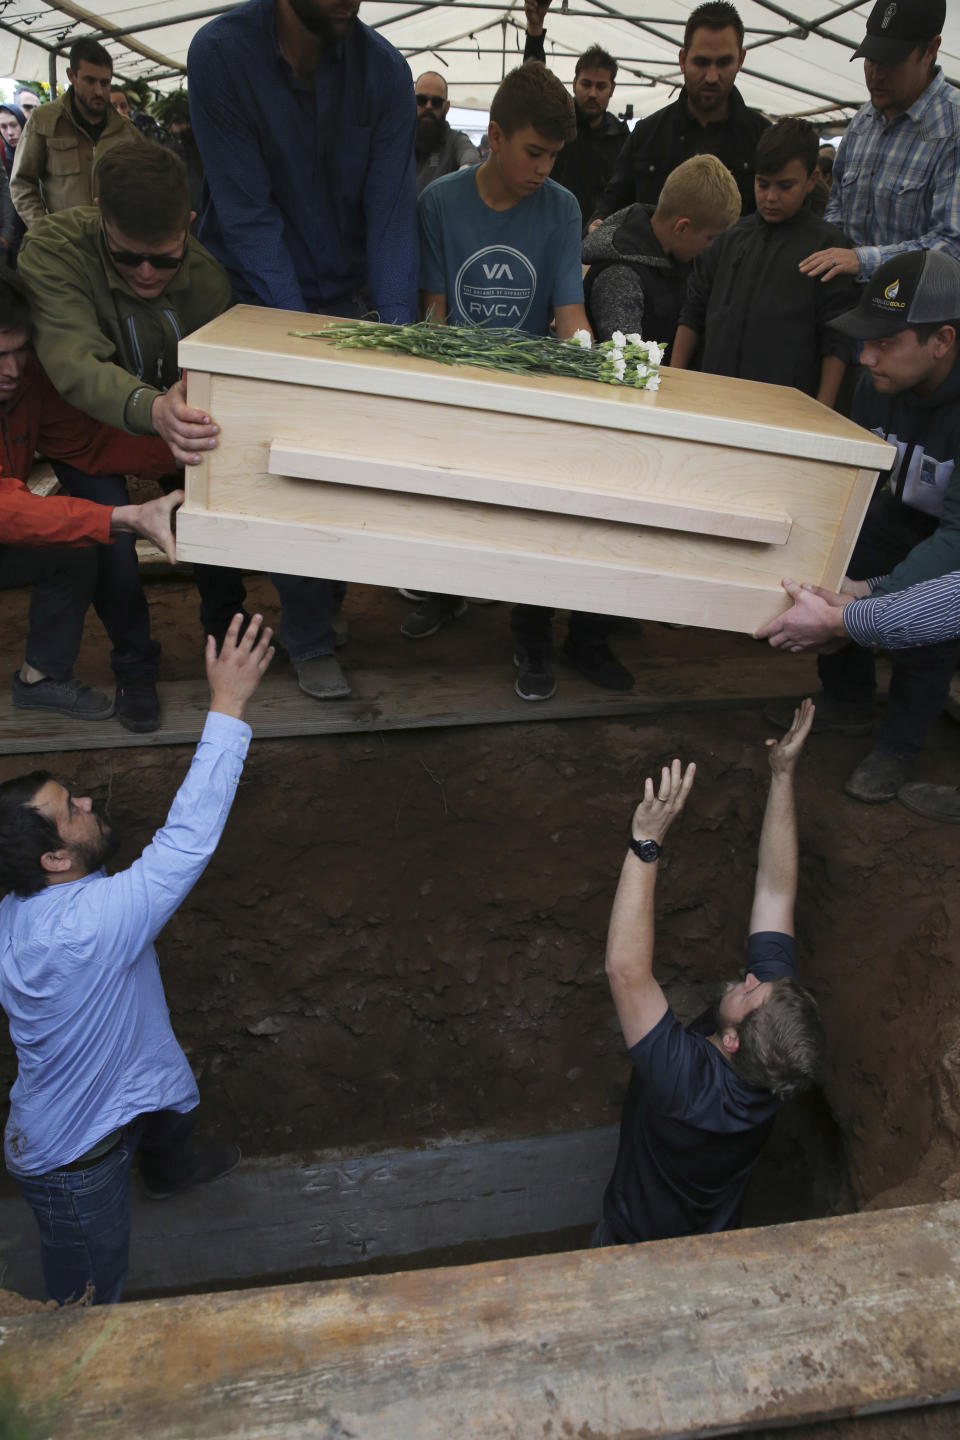 The coffin that contains the remains of 12-year-old Howard Jacob Miller Jr. is lowered into a grave at the cemetery in Colonia Le Baron, Mexico, Friday, Nov. 8, 2019, during a burial service for Rhonita Miller and four of her young children, who were murdered by drug cartel gunmen. The bodies of Miller and four of her children were taken in a convoy of pickup trucks and SUVS, on the same dirt-and-rock mountainous road where they were killed Monday, for burial in the community of Colonia Le Baron in Chihuahua state. (AP Photo/Marco Ugarte)